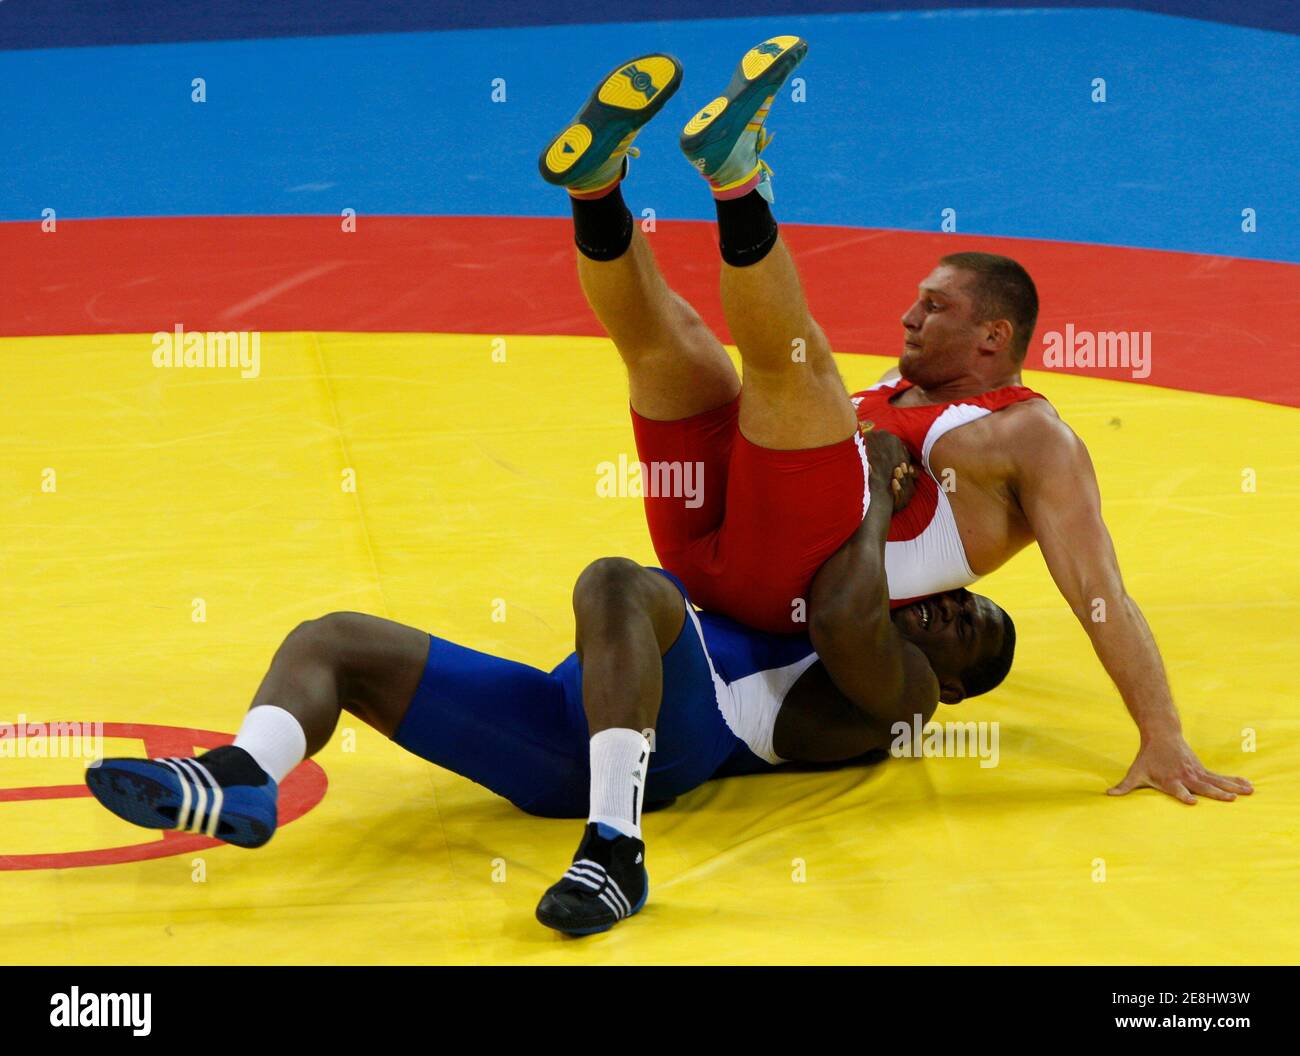 Khasan Baroev of  Russia (in red) fights Mijain Lopez of Cuba during their 120kg men's Greco-Roman wrestling final bout at the Beijing 2008 Olympic Games August 14, 2008.     REUTERS/Oleg Popov (CHINA) Stock Photo